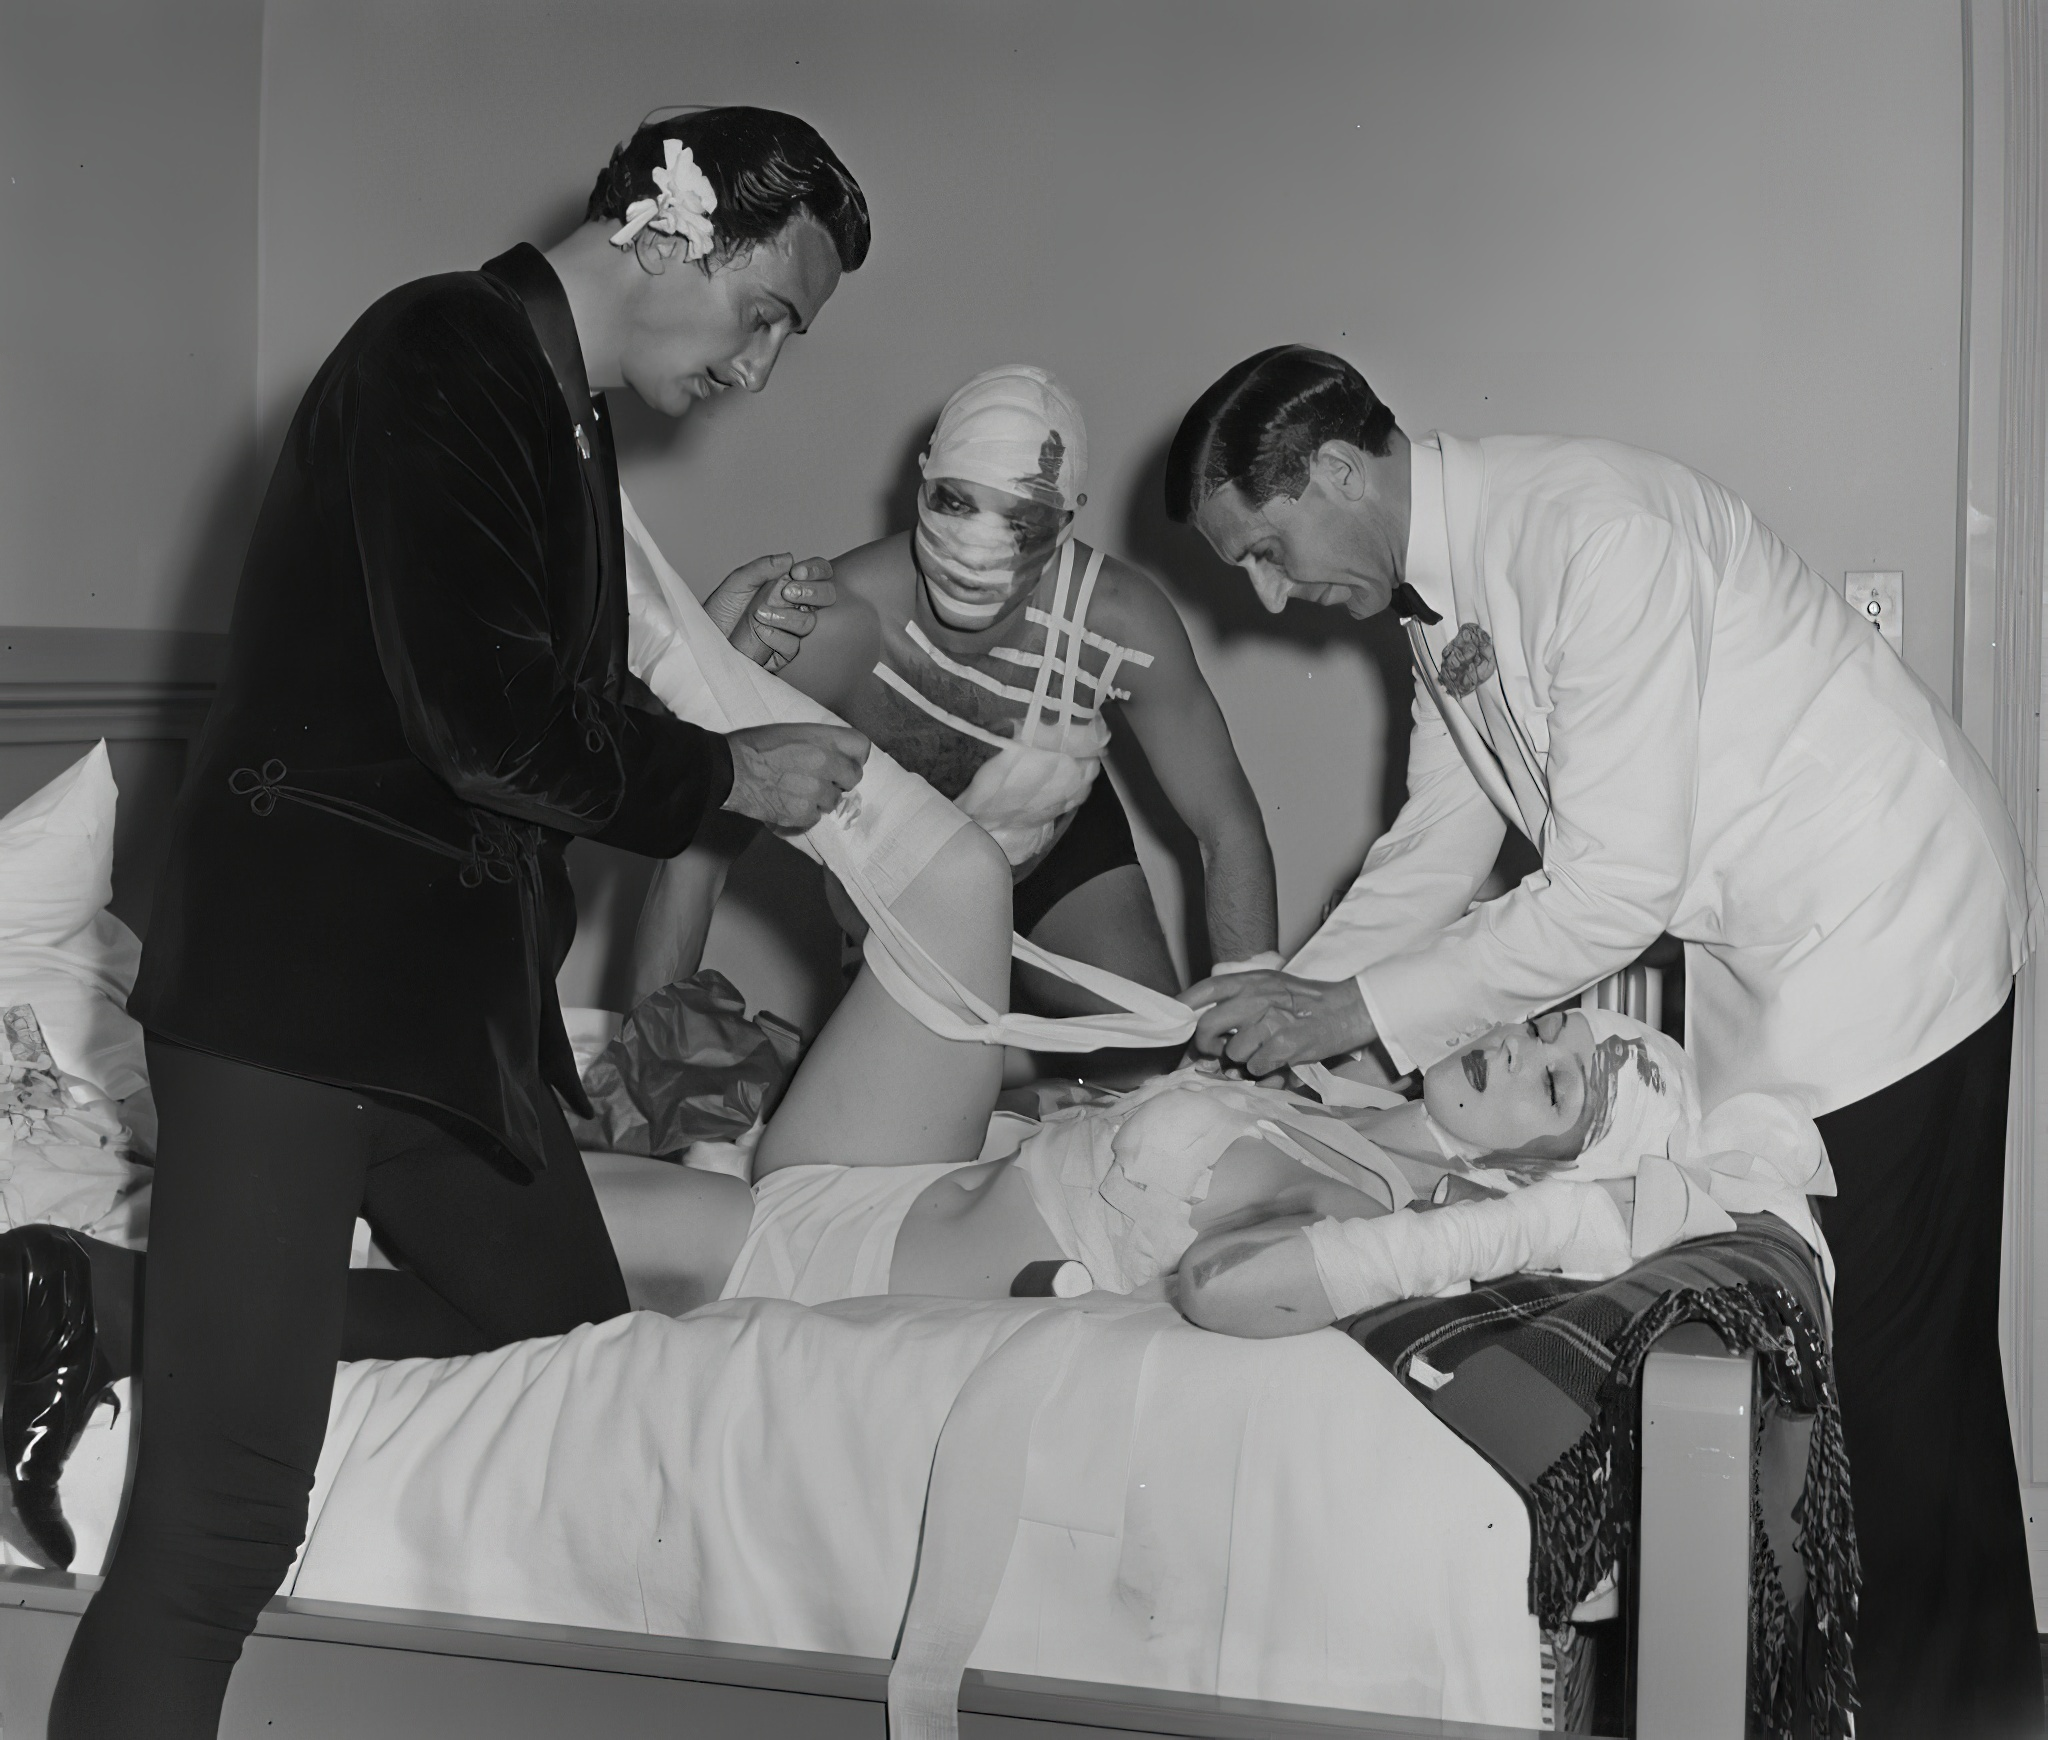 Salvador Dali and others bandaging up Lady Dancer. Hotel Del Monte, Monterey, California, 1941.